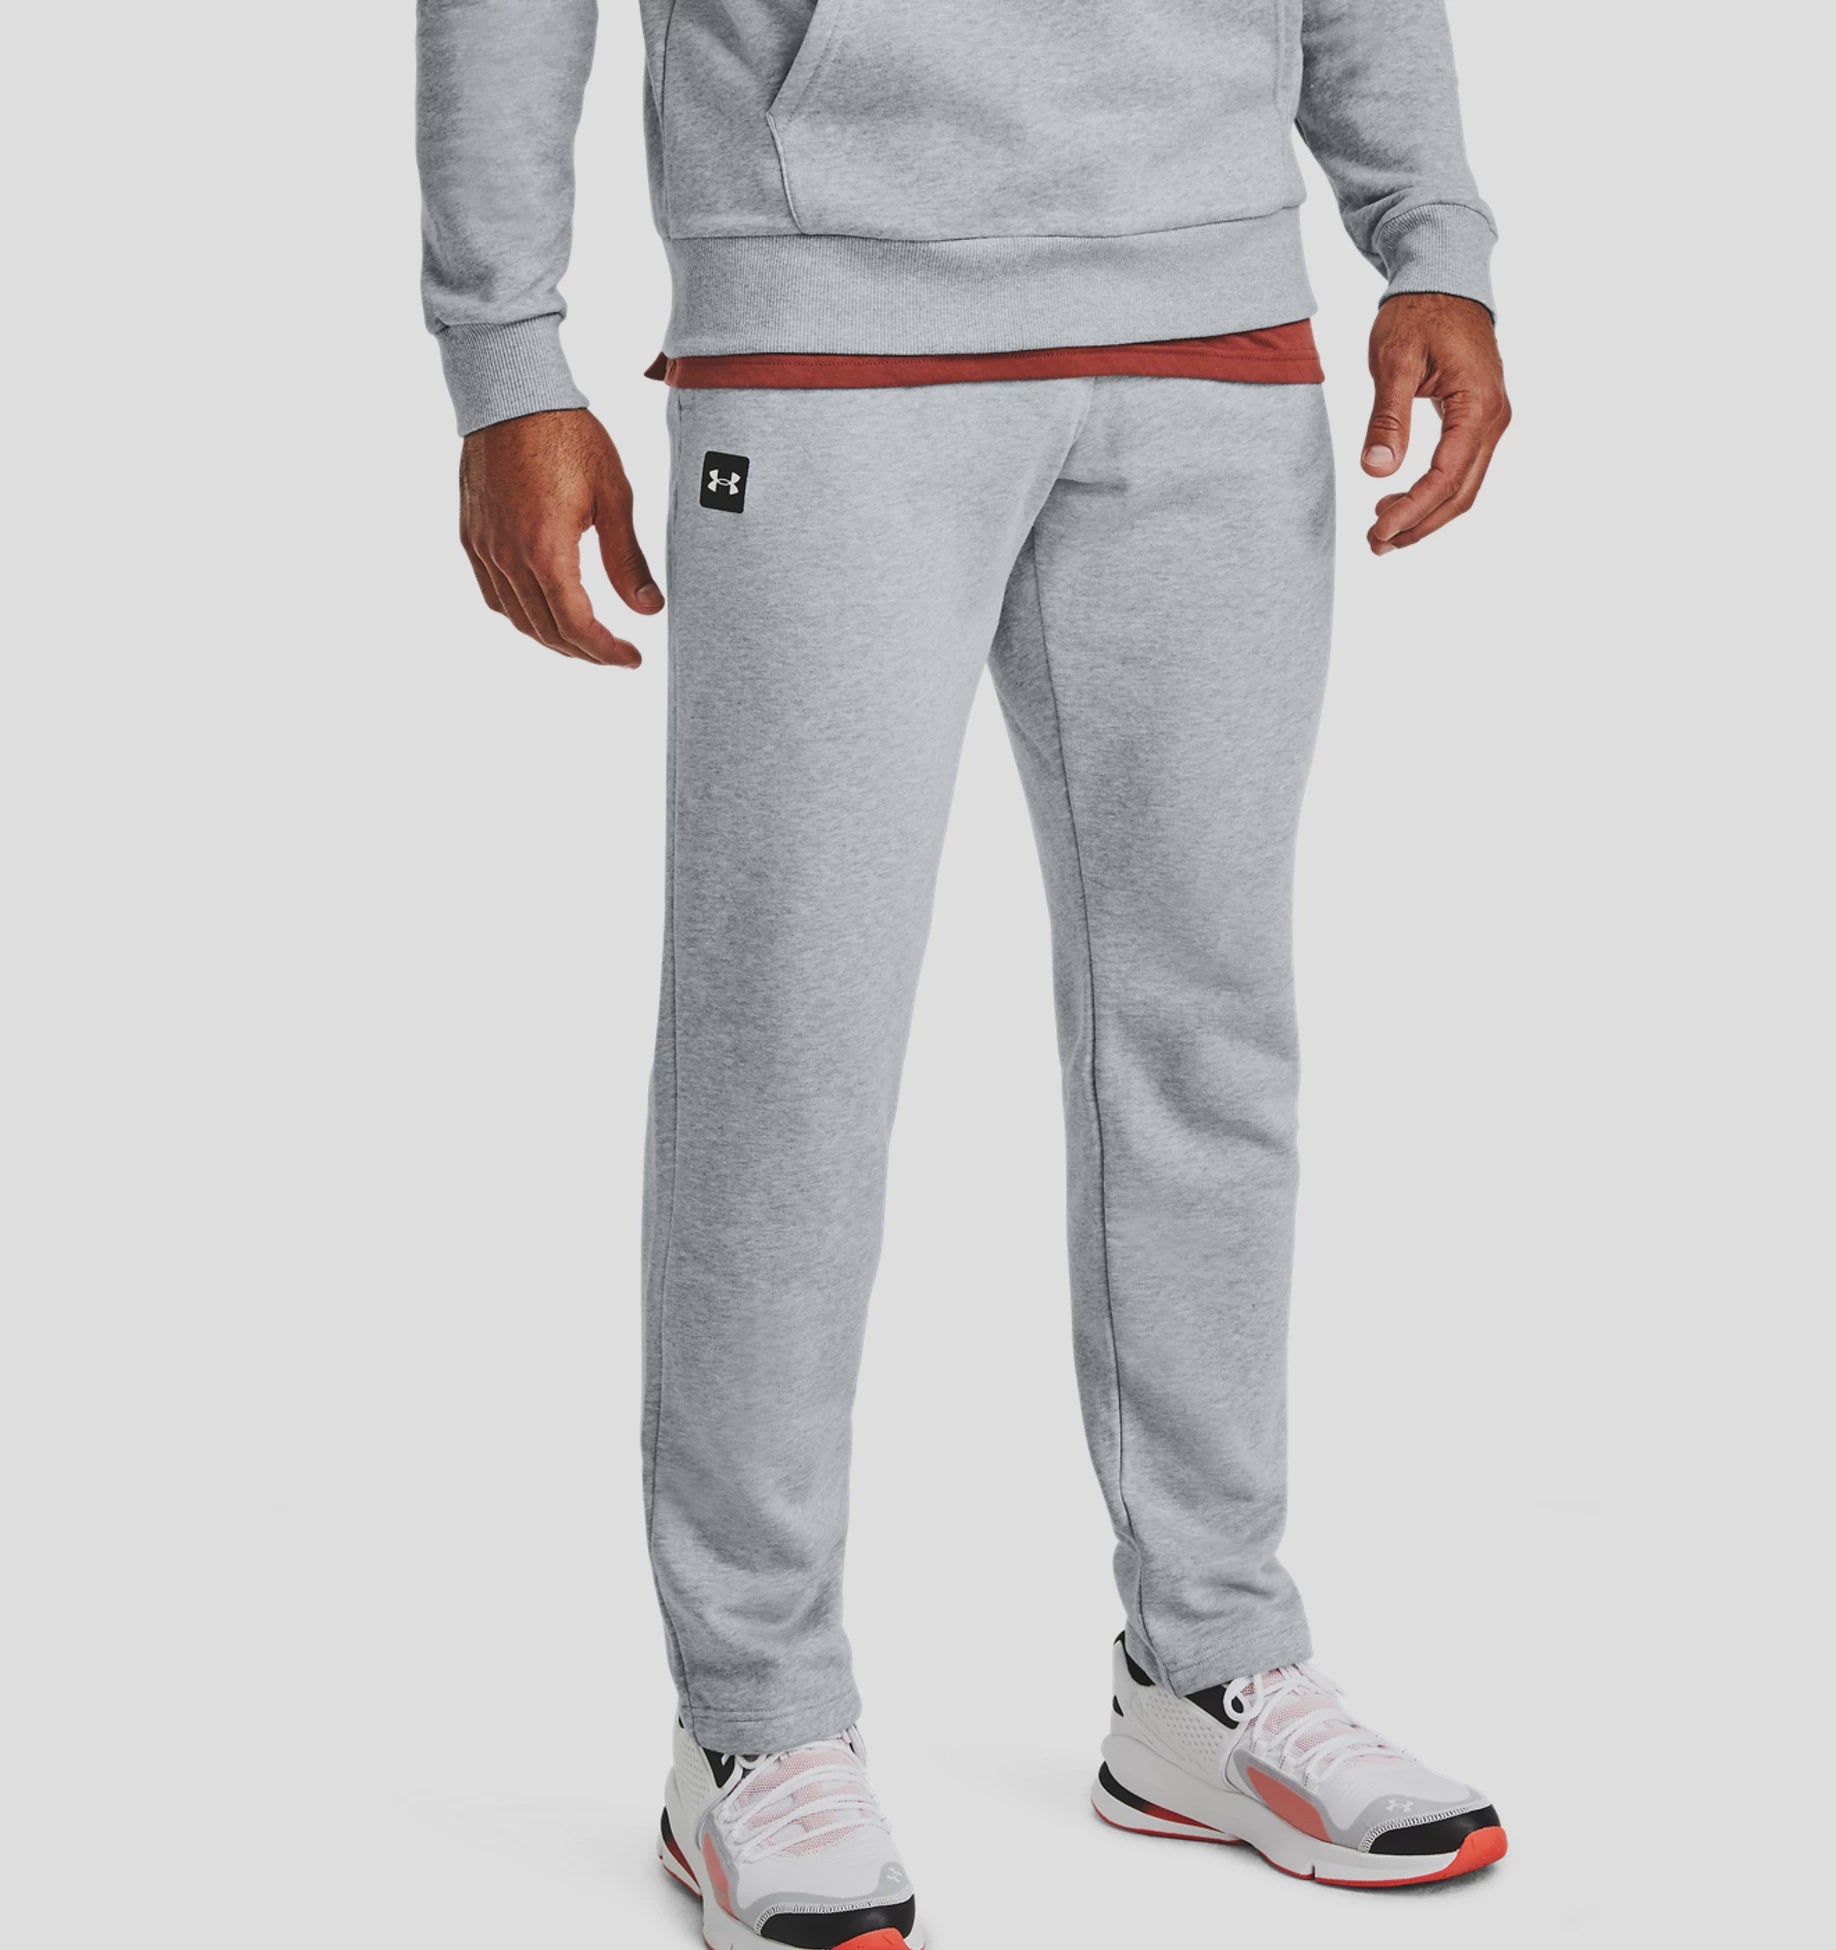 Under Armour Rival Fleece Pants Gray Light Heather 1357129-012 - Free  Shipping at LASC